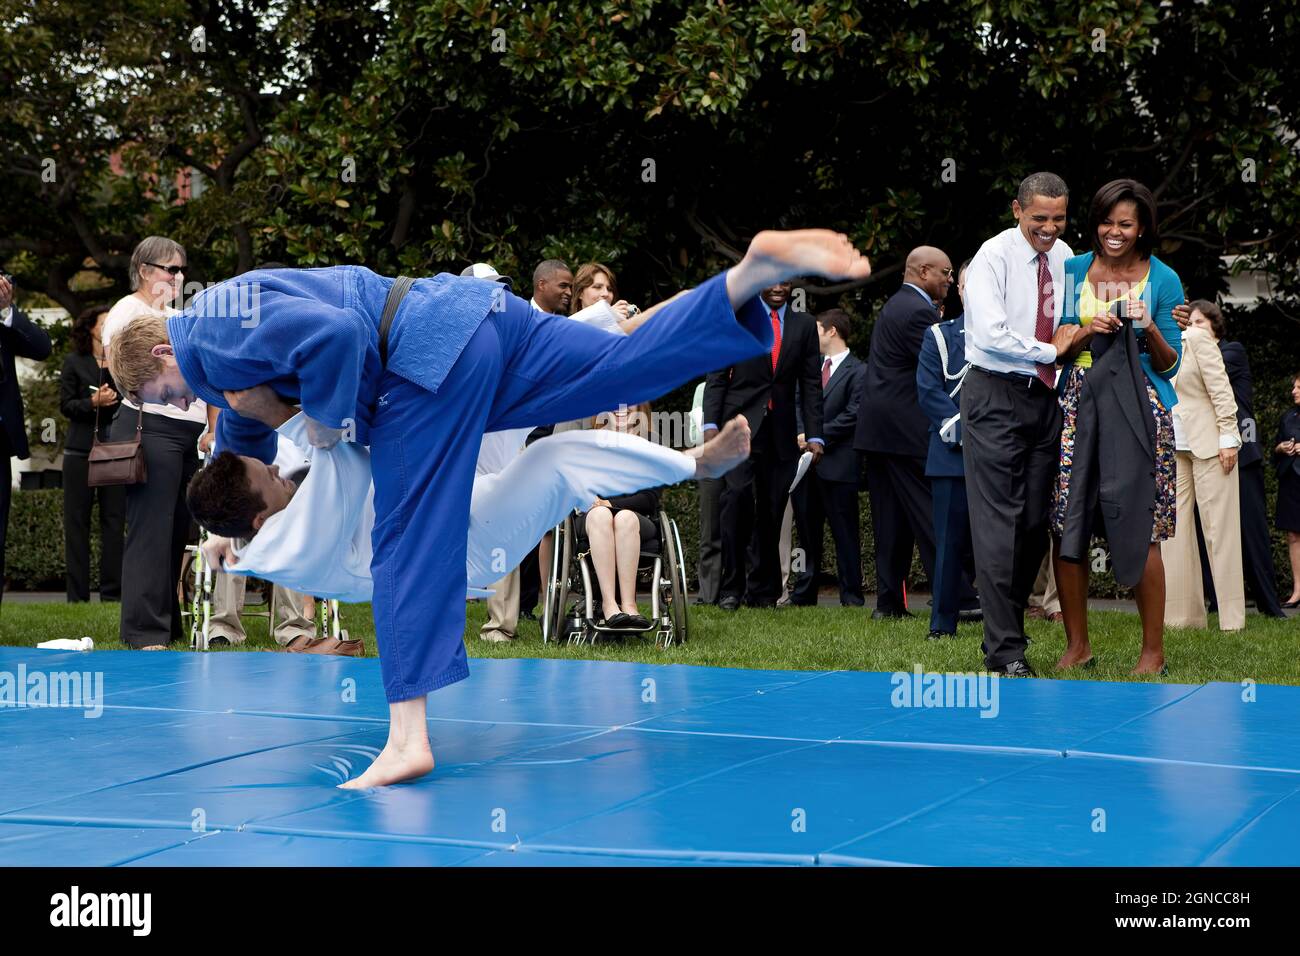 President Barack Obama and First Lady Michelle Obama watch Olympian Ryan Reser, in white, and Paralympian Myles Porter during a judo demonstration, part of the U.S